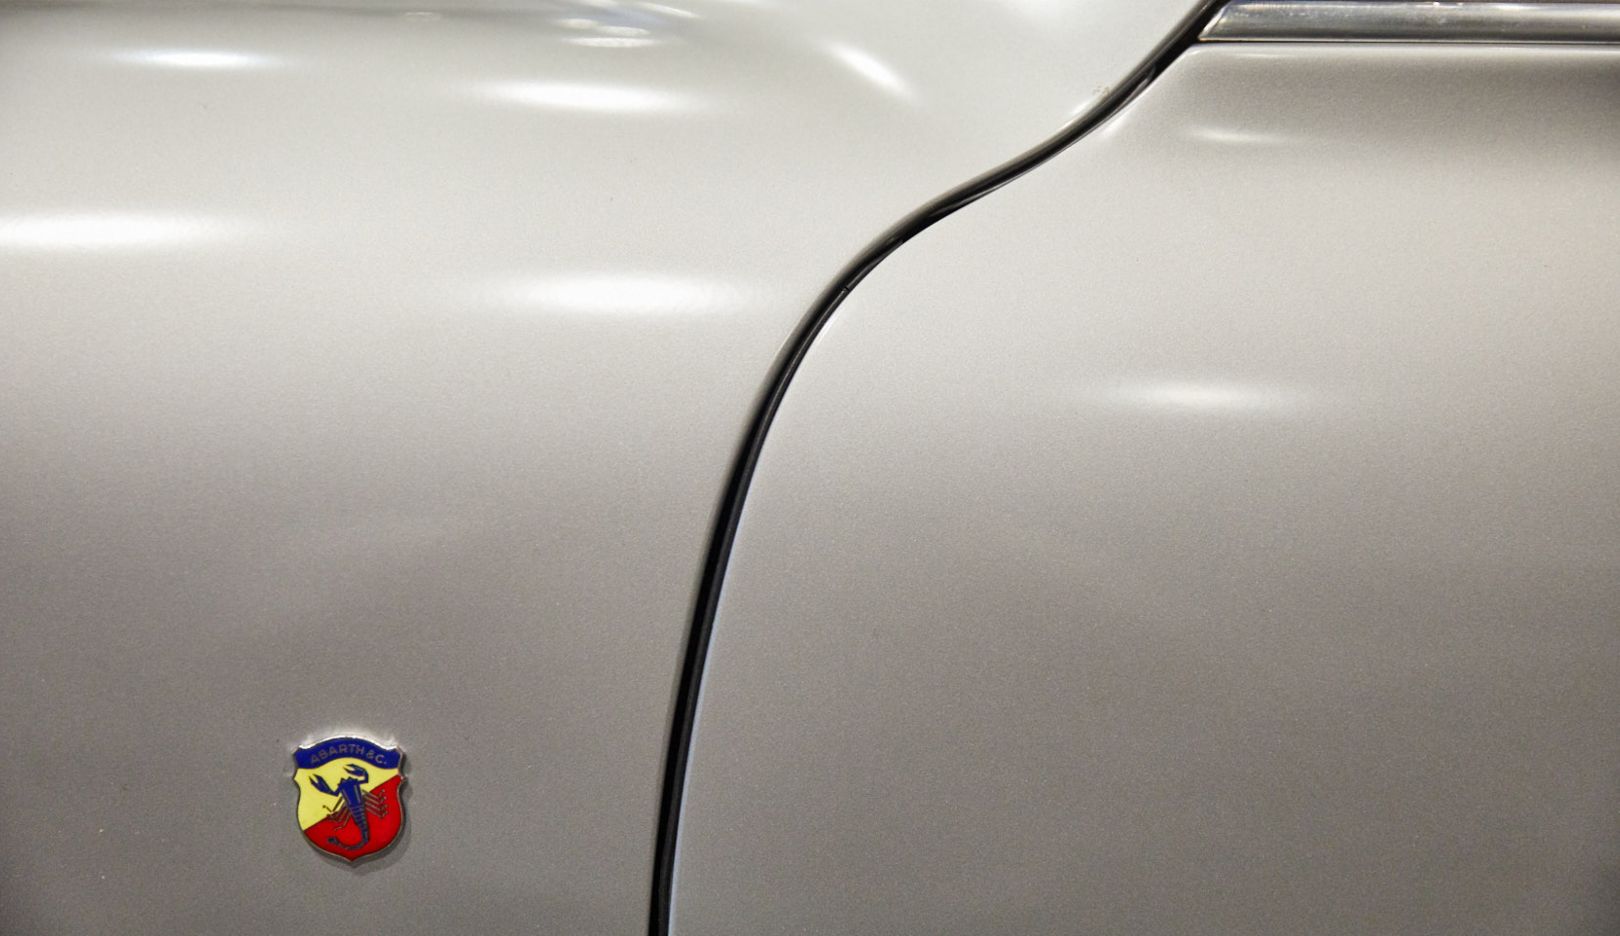 The Italian-Austrian car builder Carlo Abarth was involved in creating the race car. His crest adorns the aluminum body.